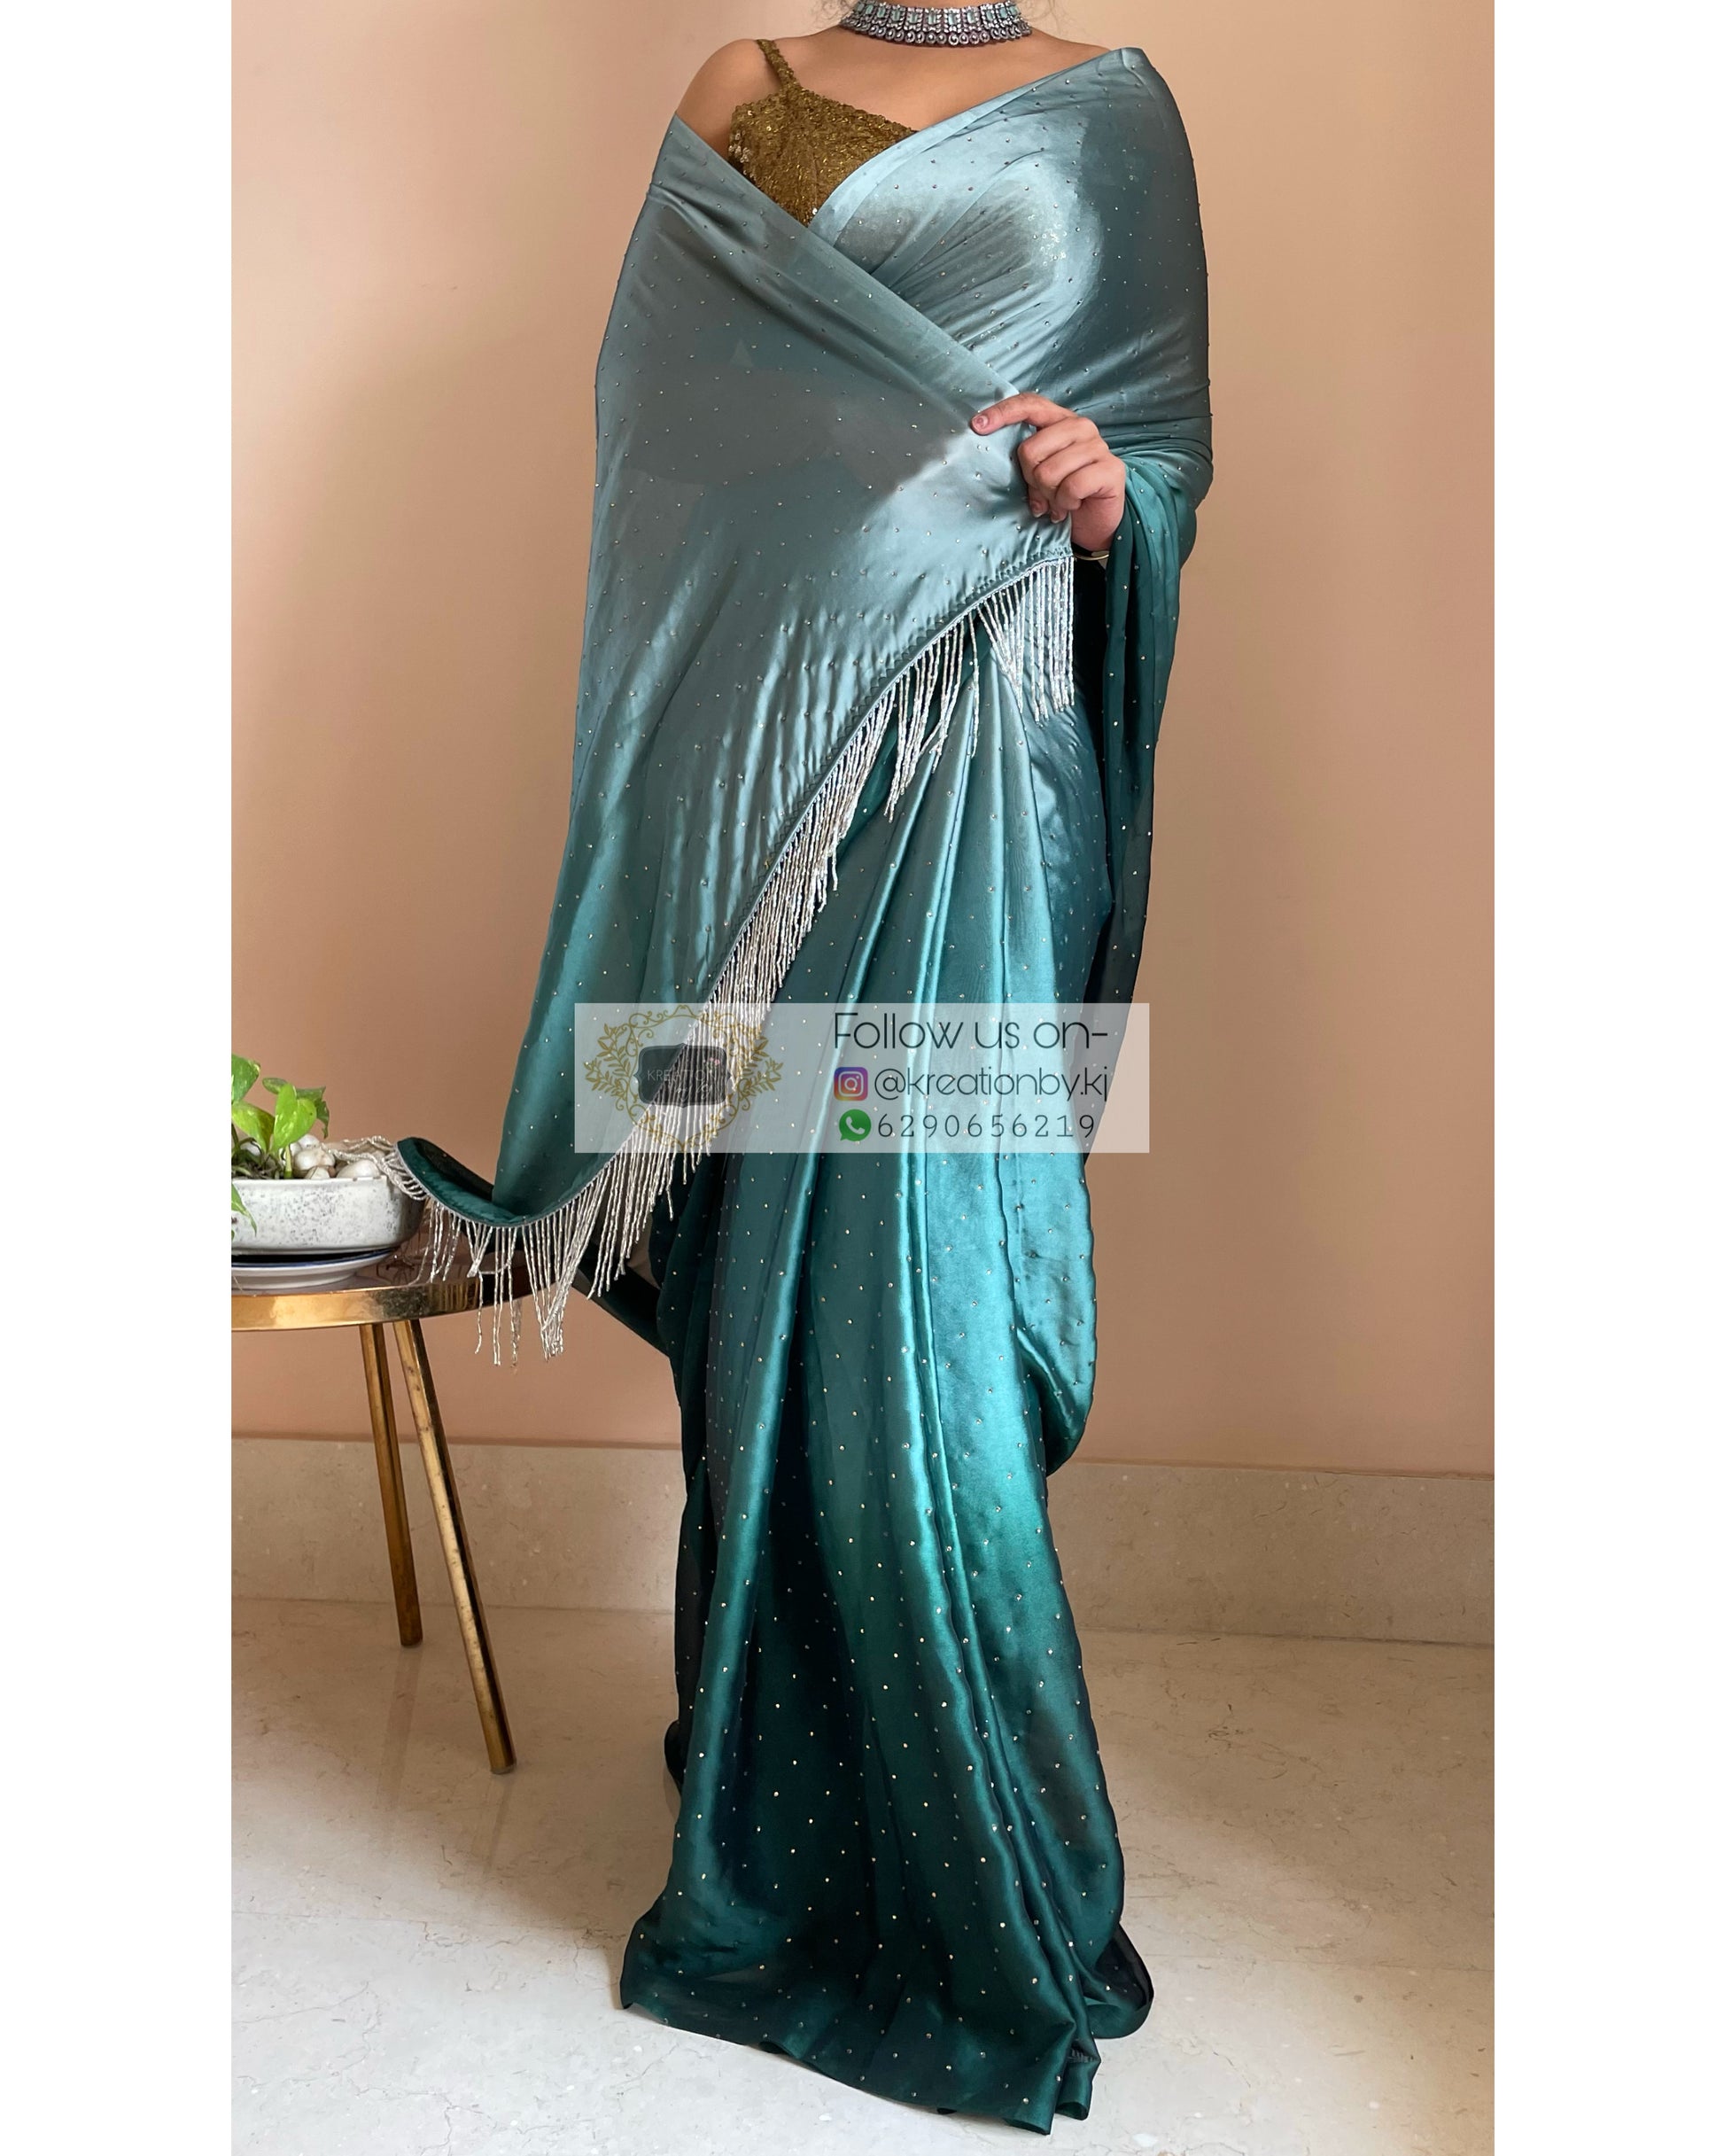 Ombré Emerald Green Saree with Stone Work - kreationbykj